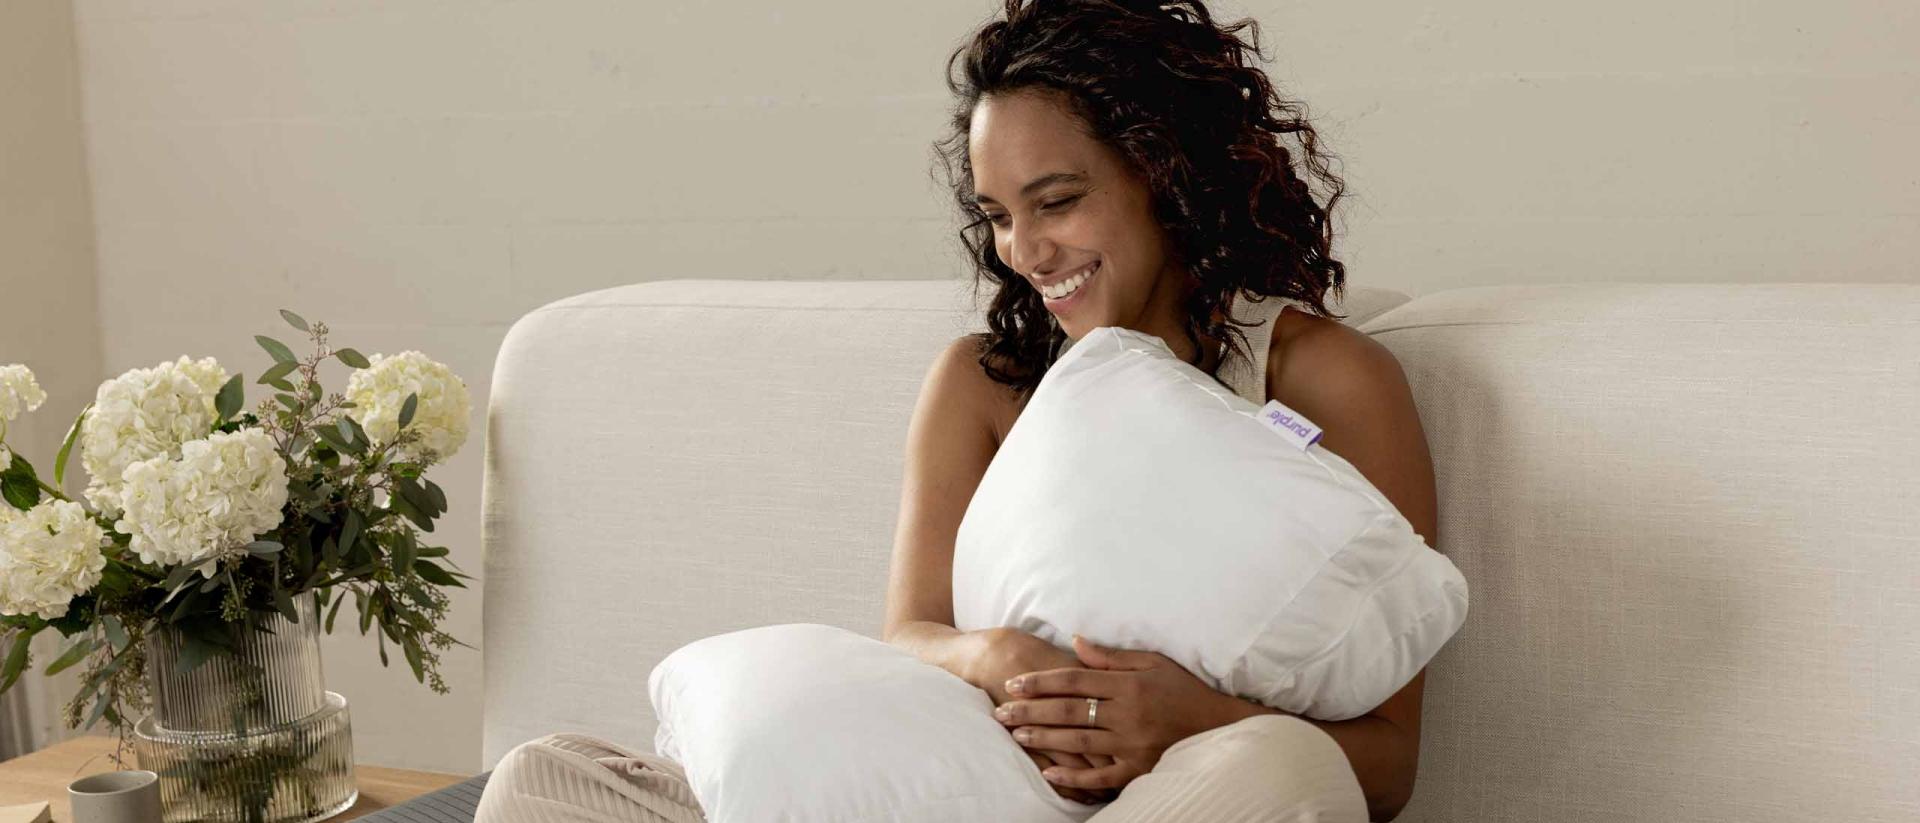 Woman holding a pillow sitting on bed.